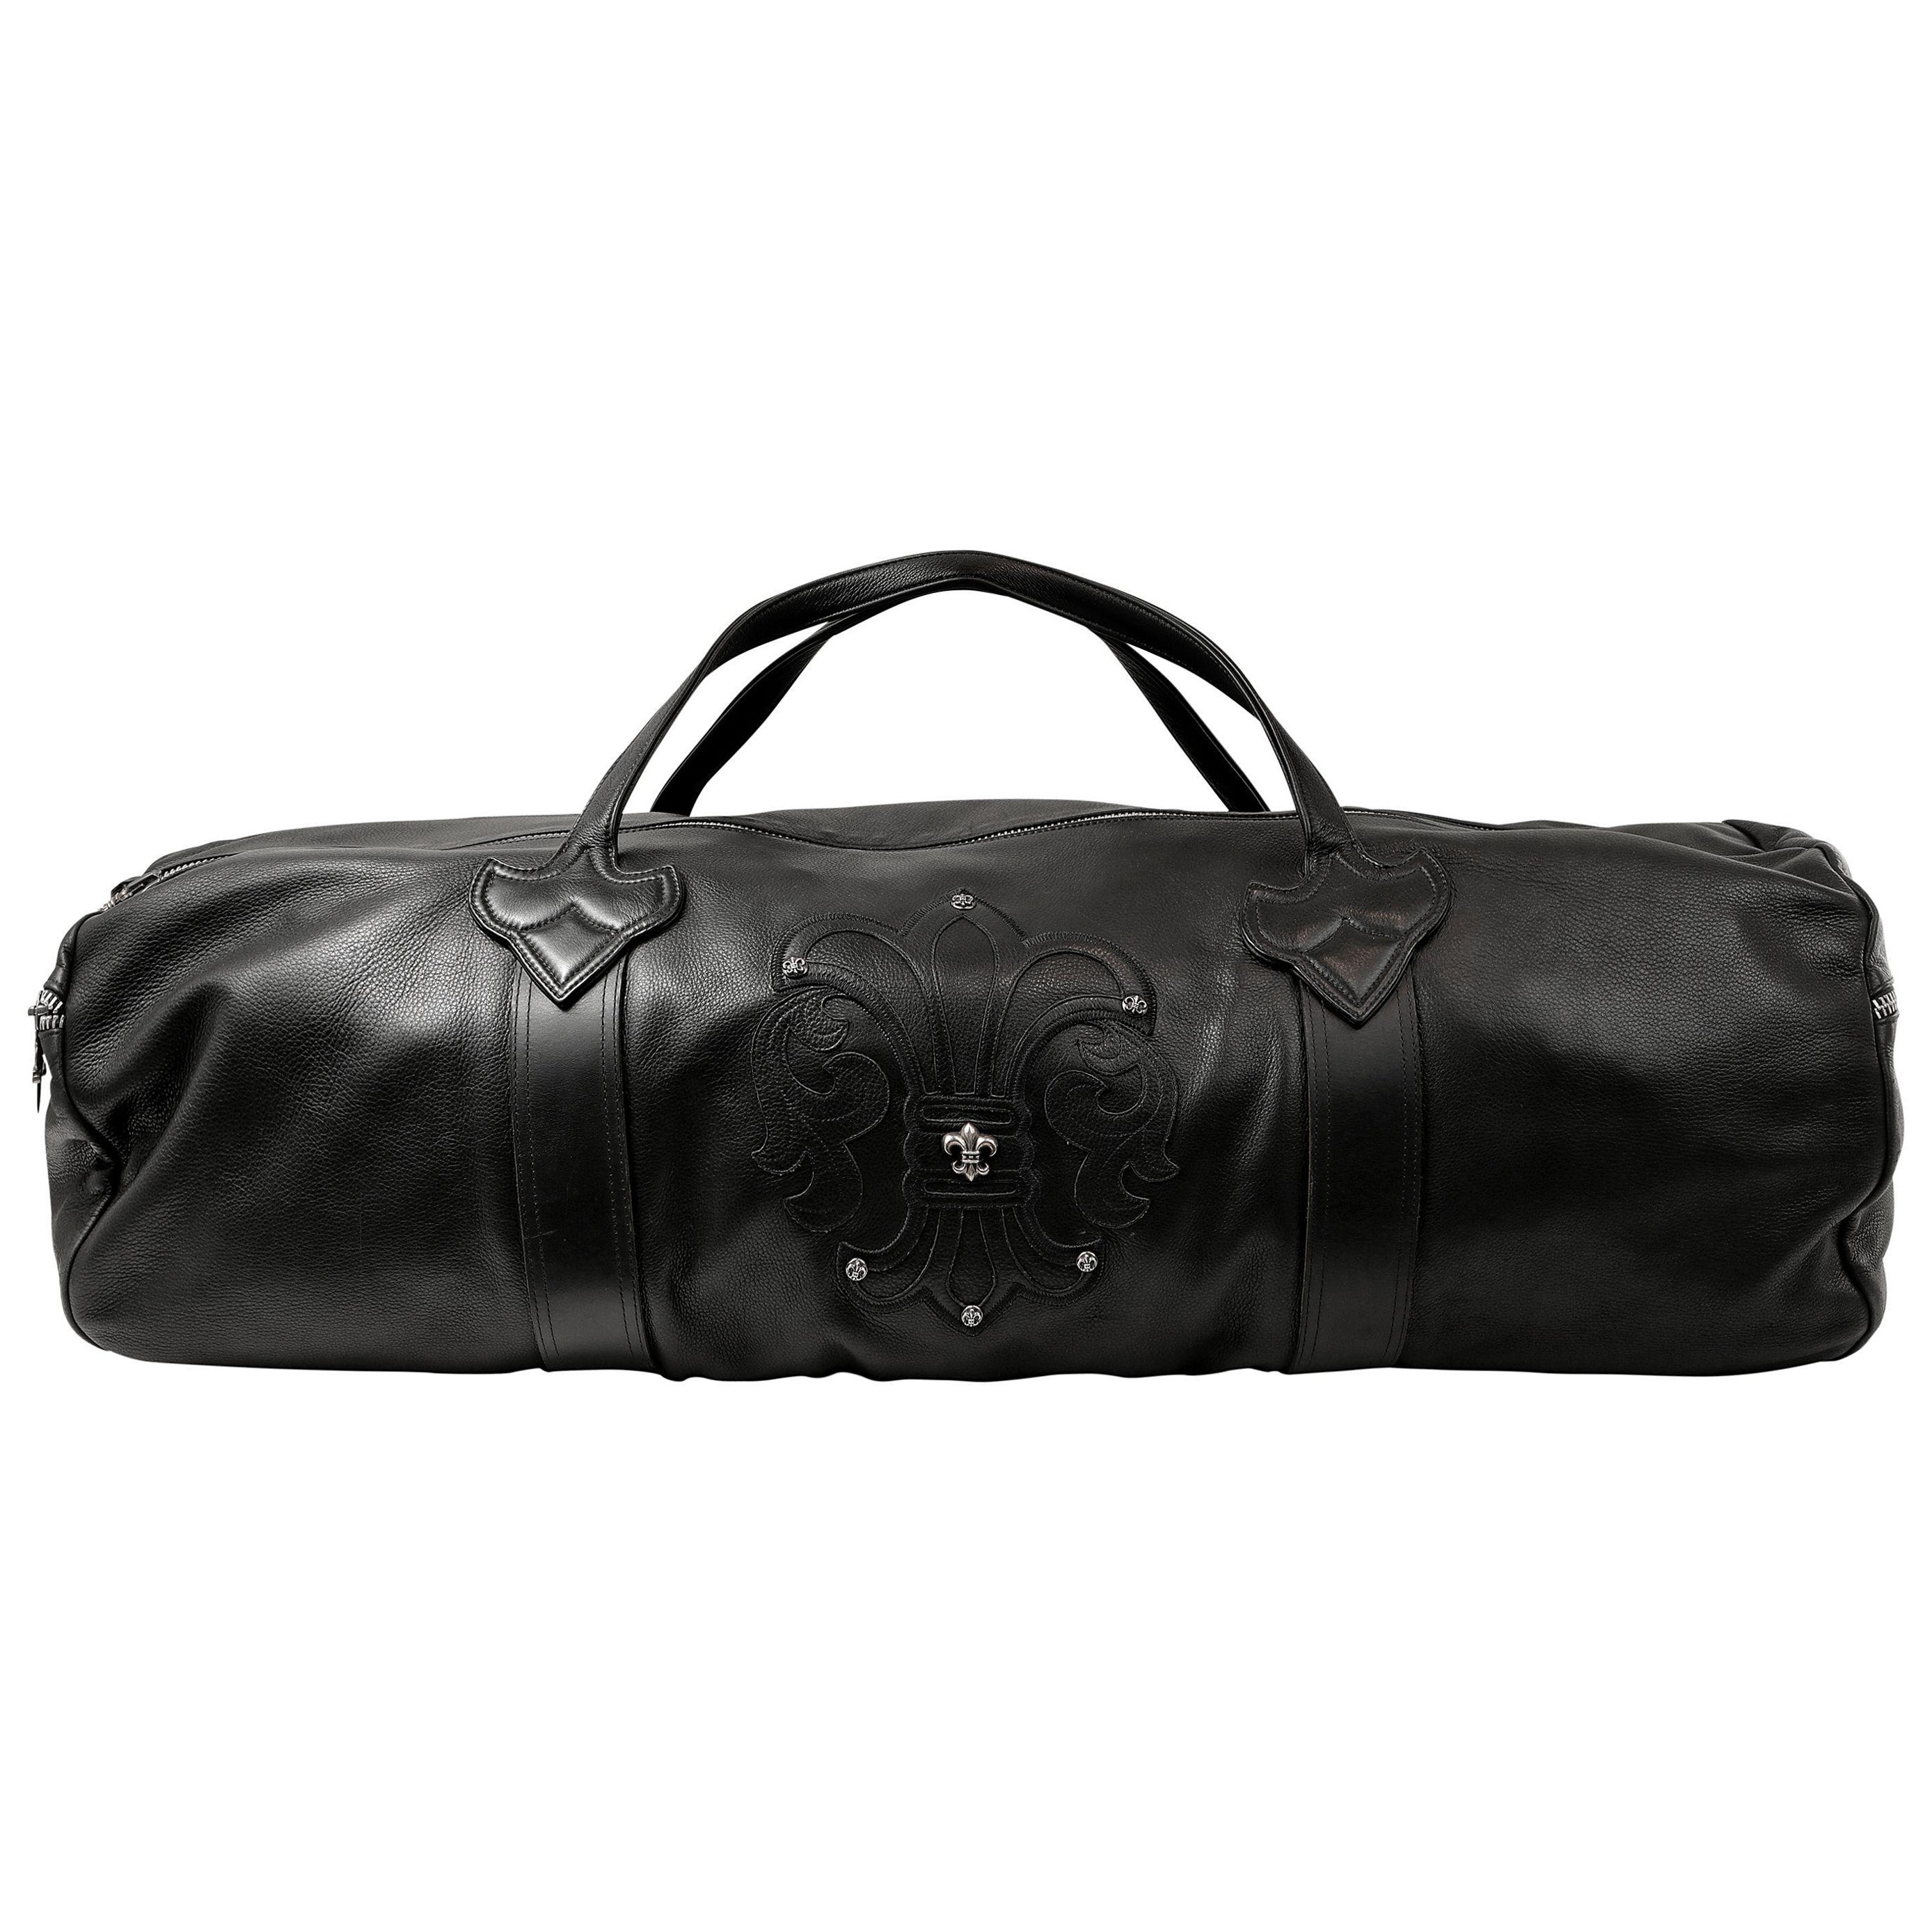 Chrome Hearts Black Glove Leather Limited Edition XL Travel Bag